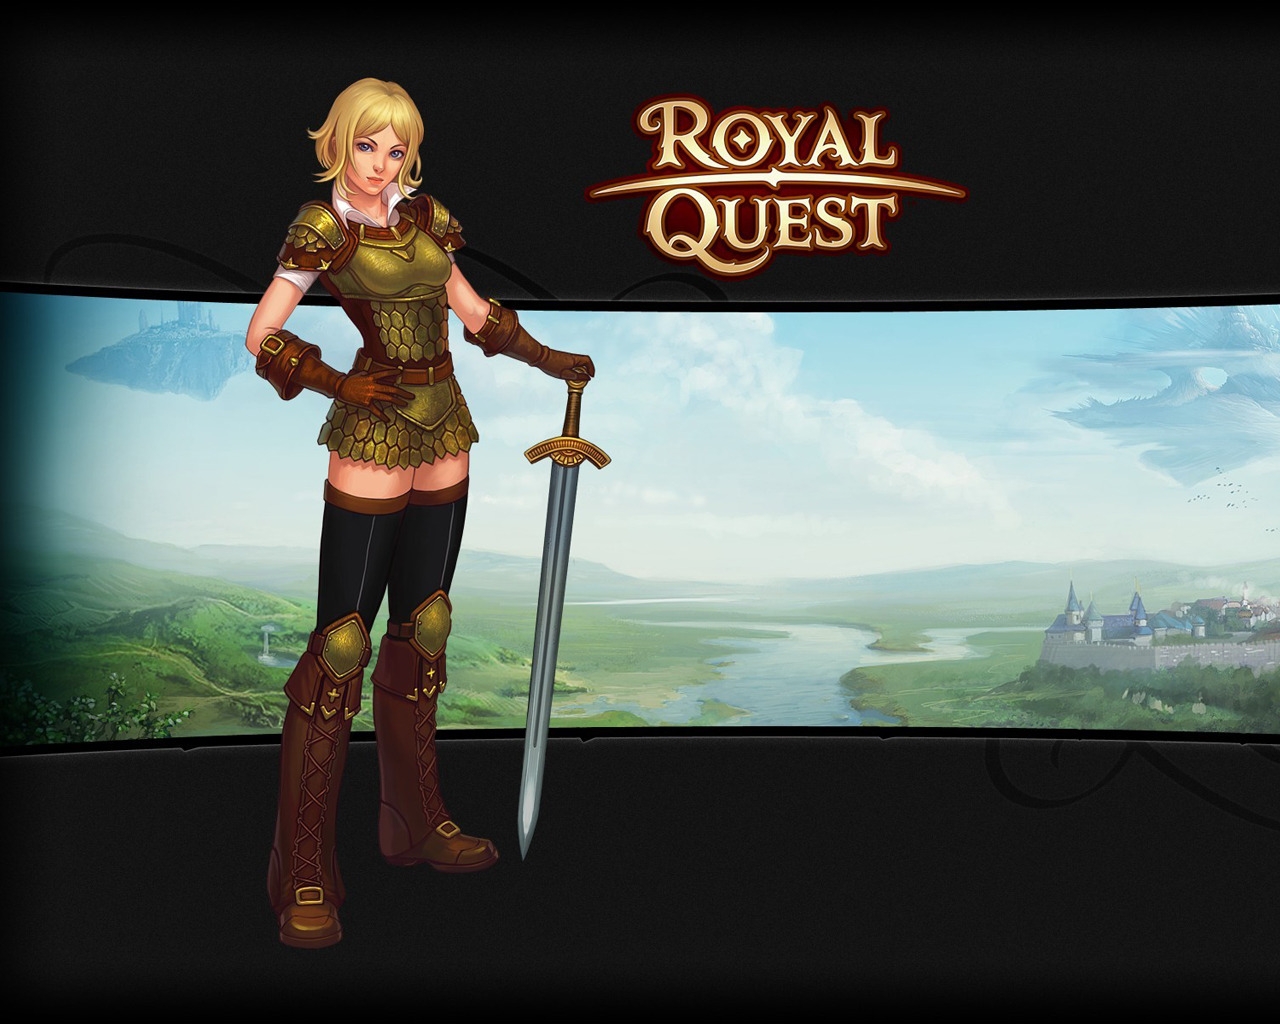 Royal Quest for 1280 x 1024 resolution